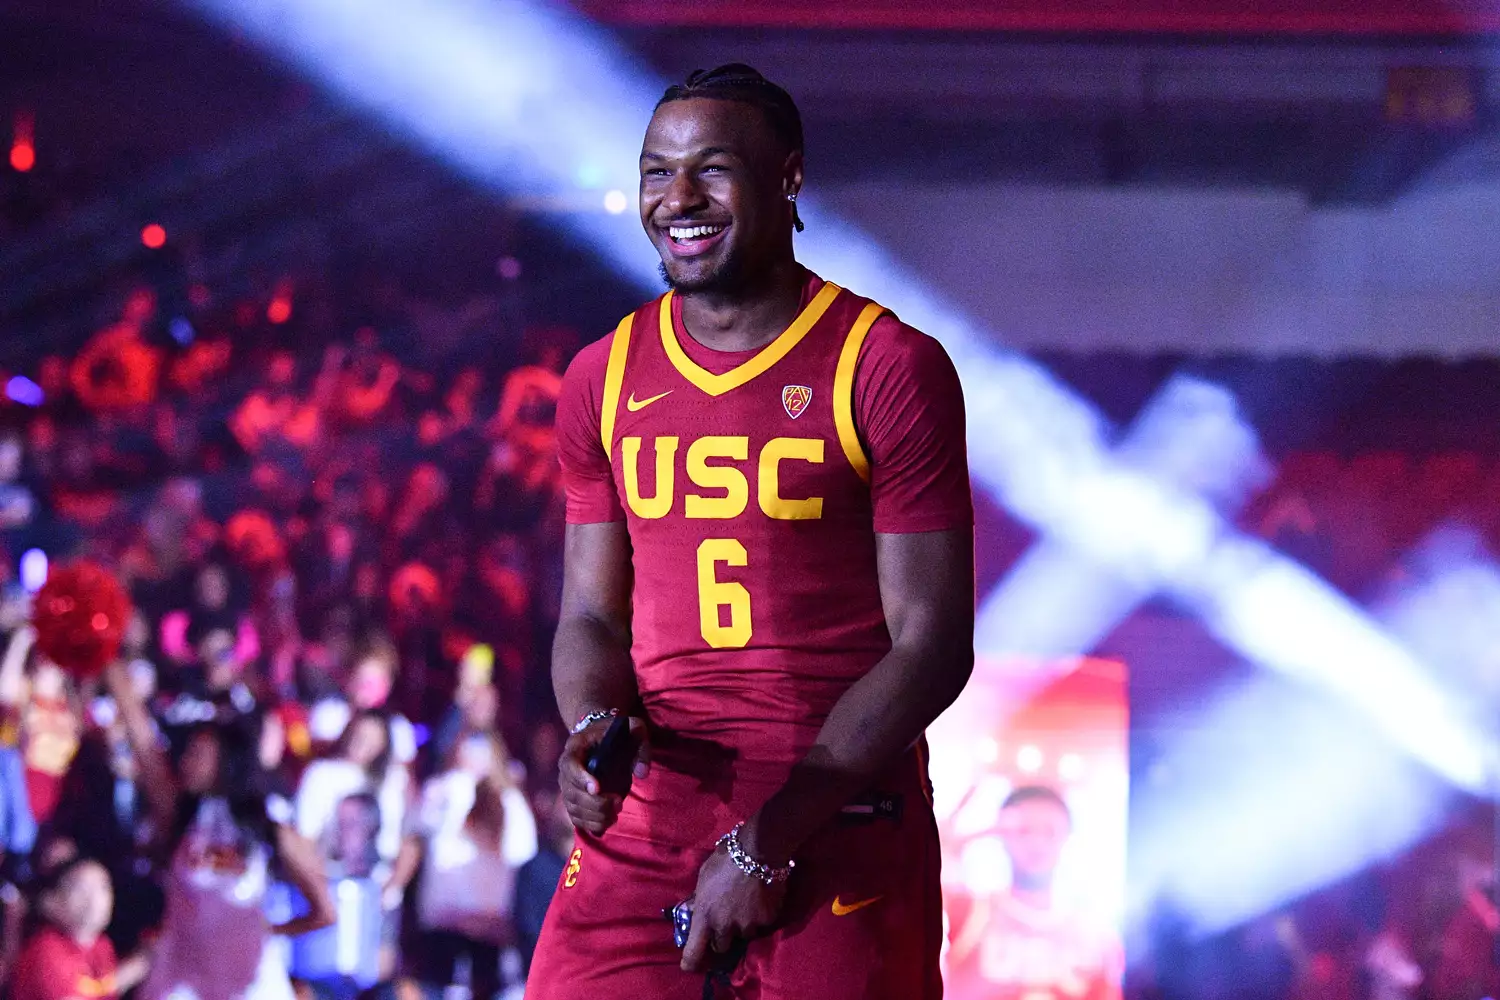 USC Trojans guard Bronny James (6) is introduced during Trojan HoopLA, a college basketball kickoff event featuring the USC Trojans, on October 19, 2023 at Galen Center in Los Angeles, CA.